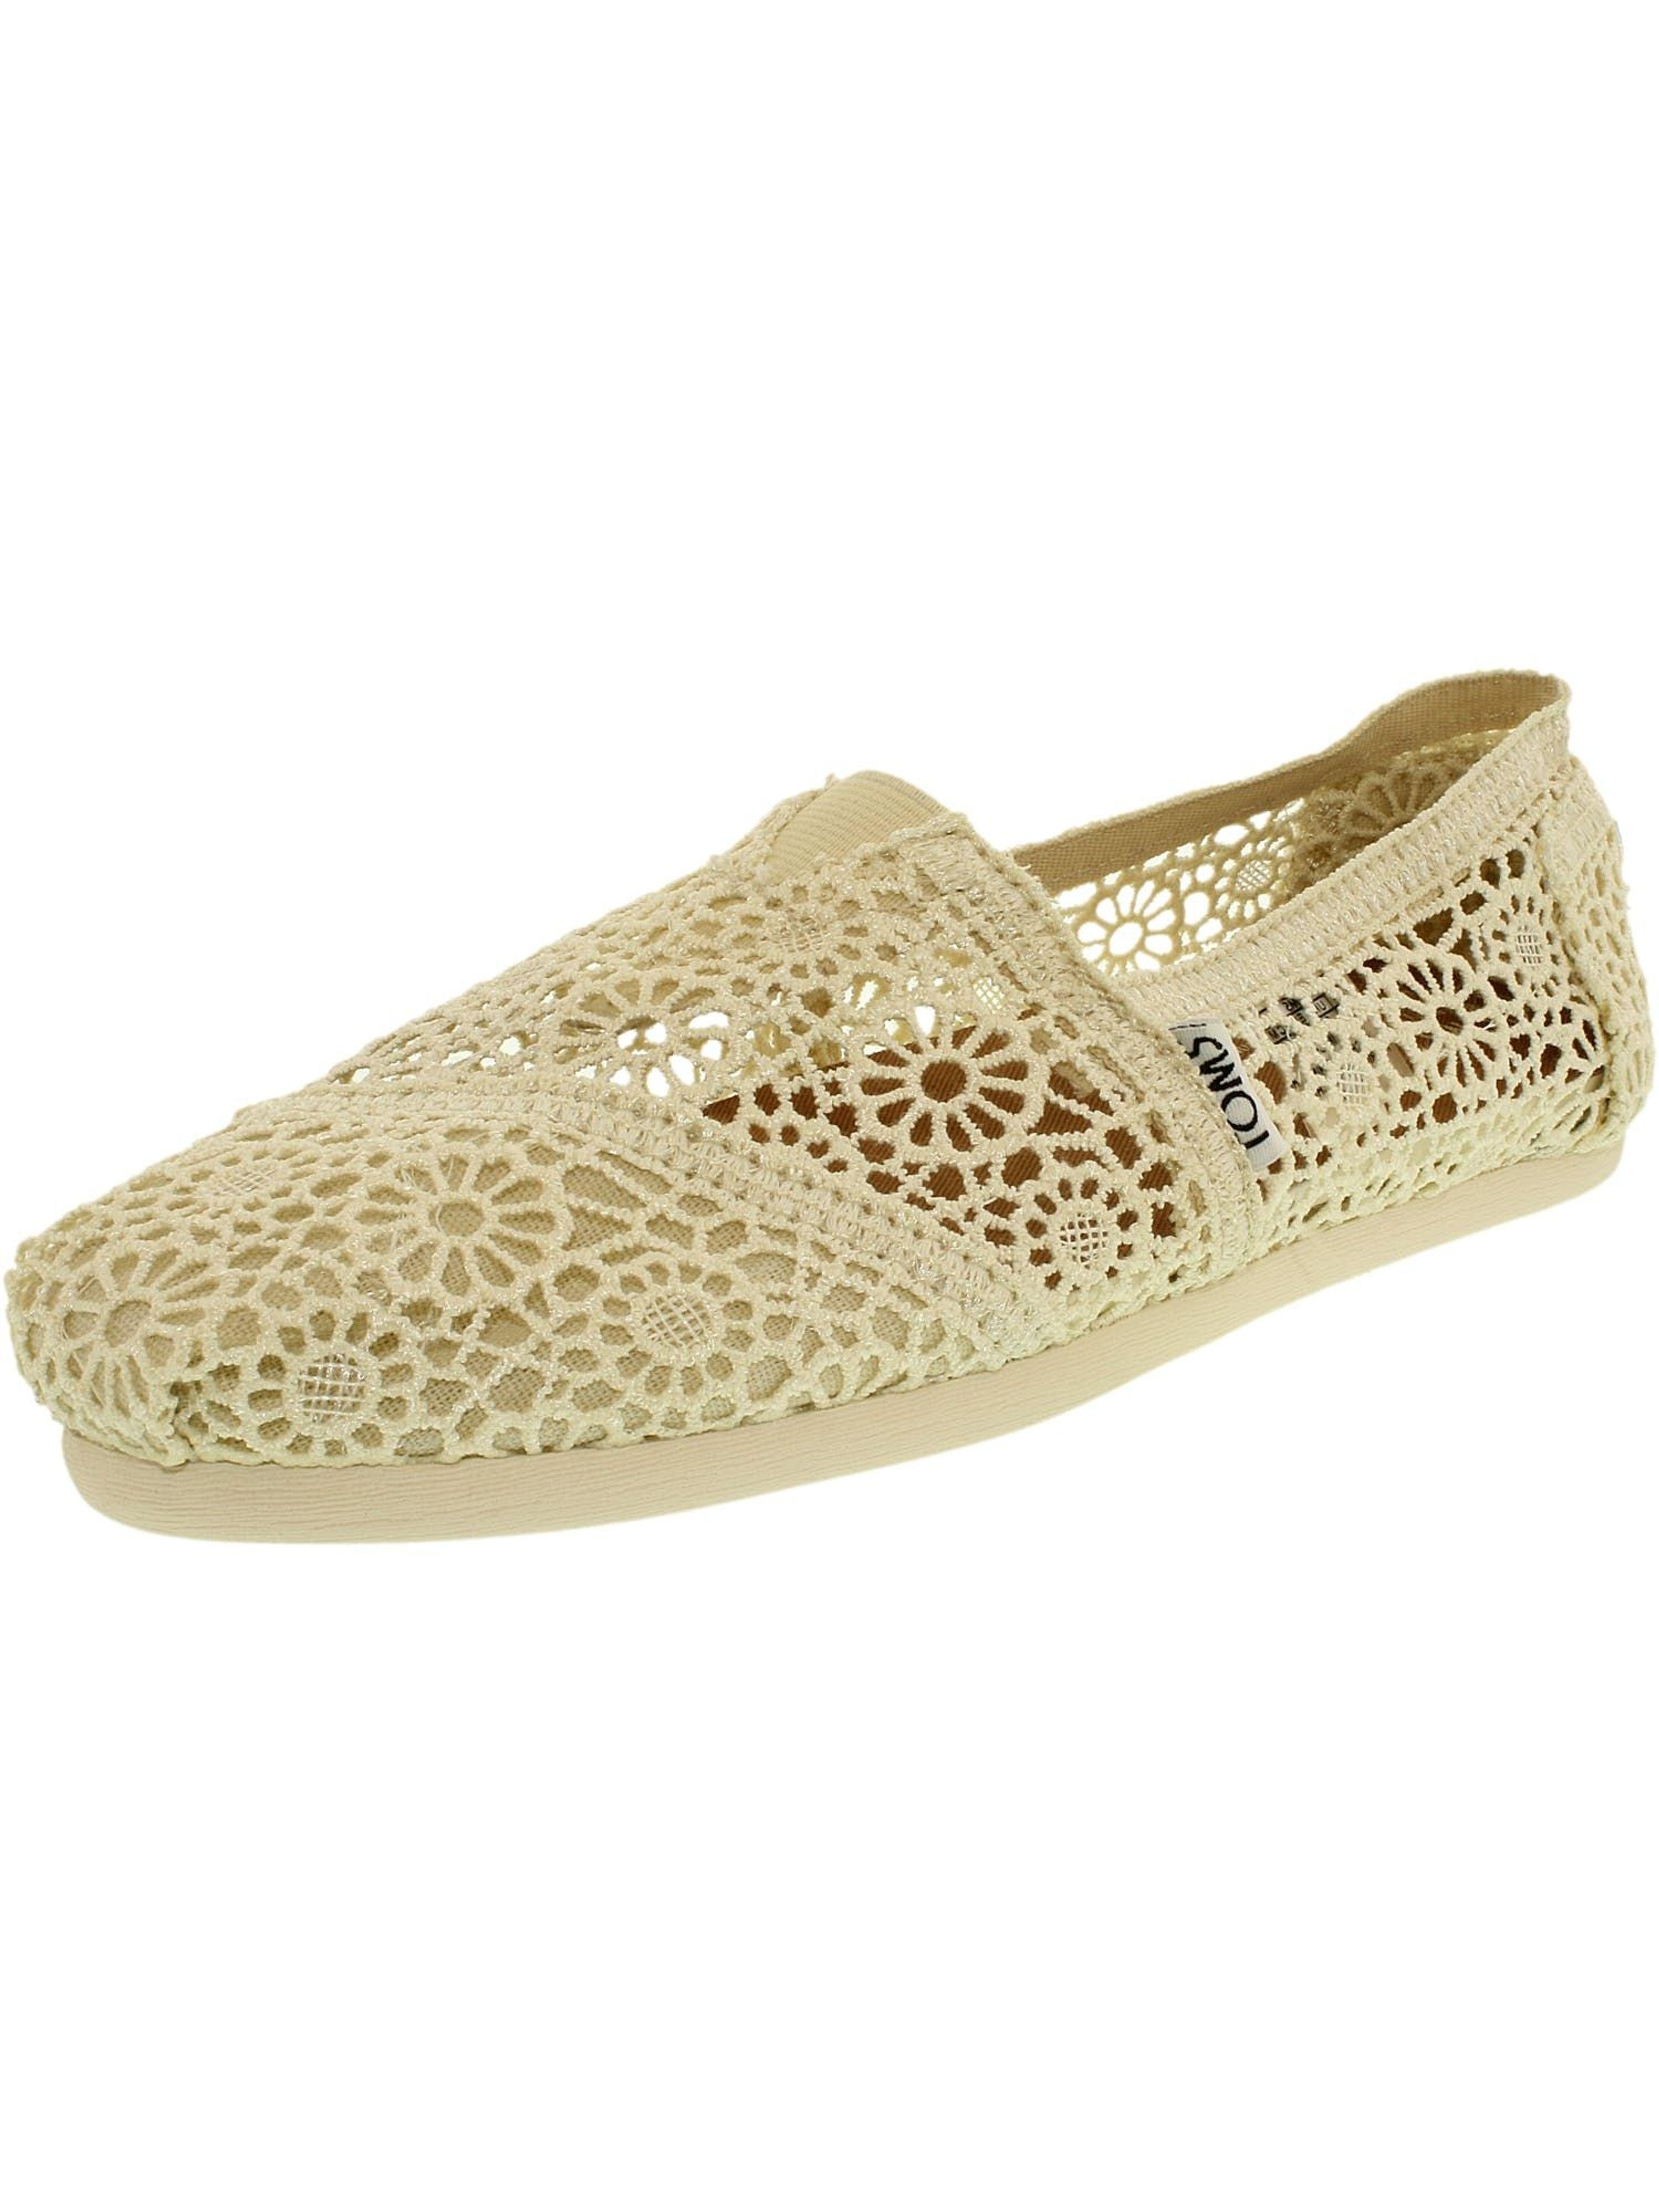 TOMS Alpargata Moroccan Crochet Slip-on Shoes in Natural | Lyst